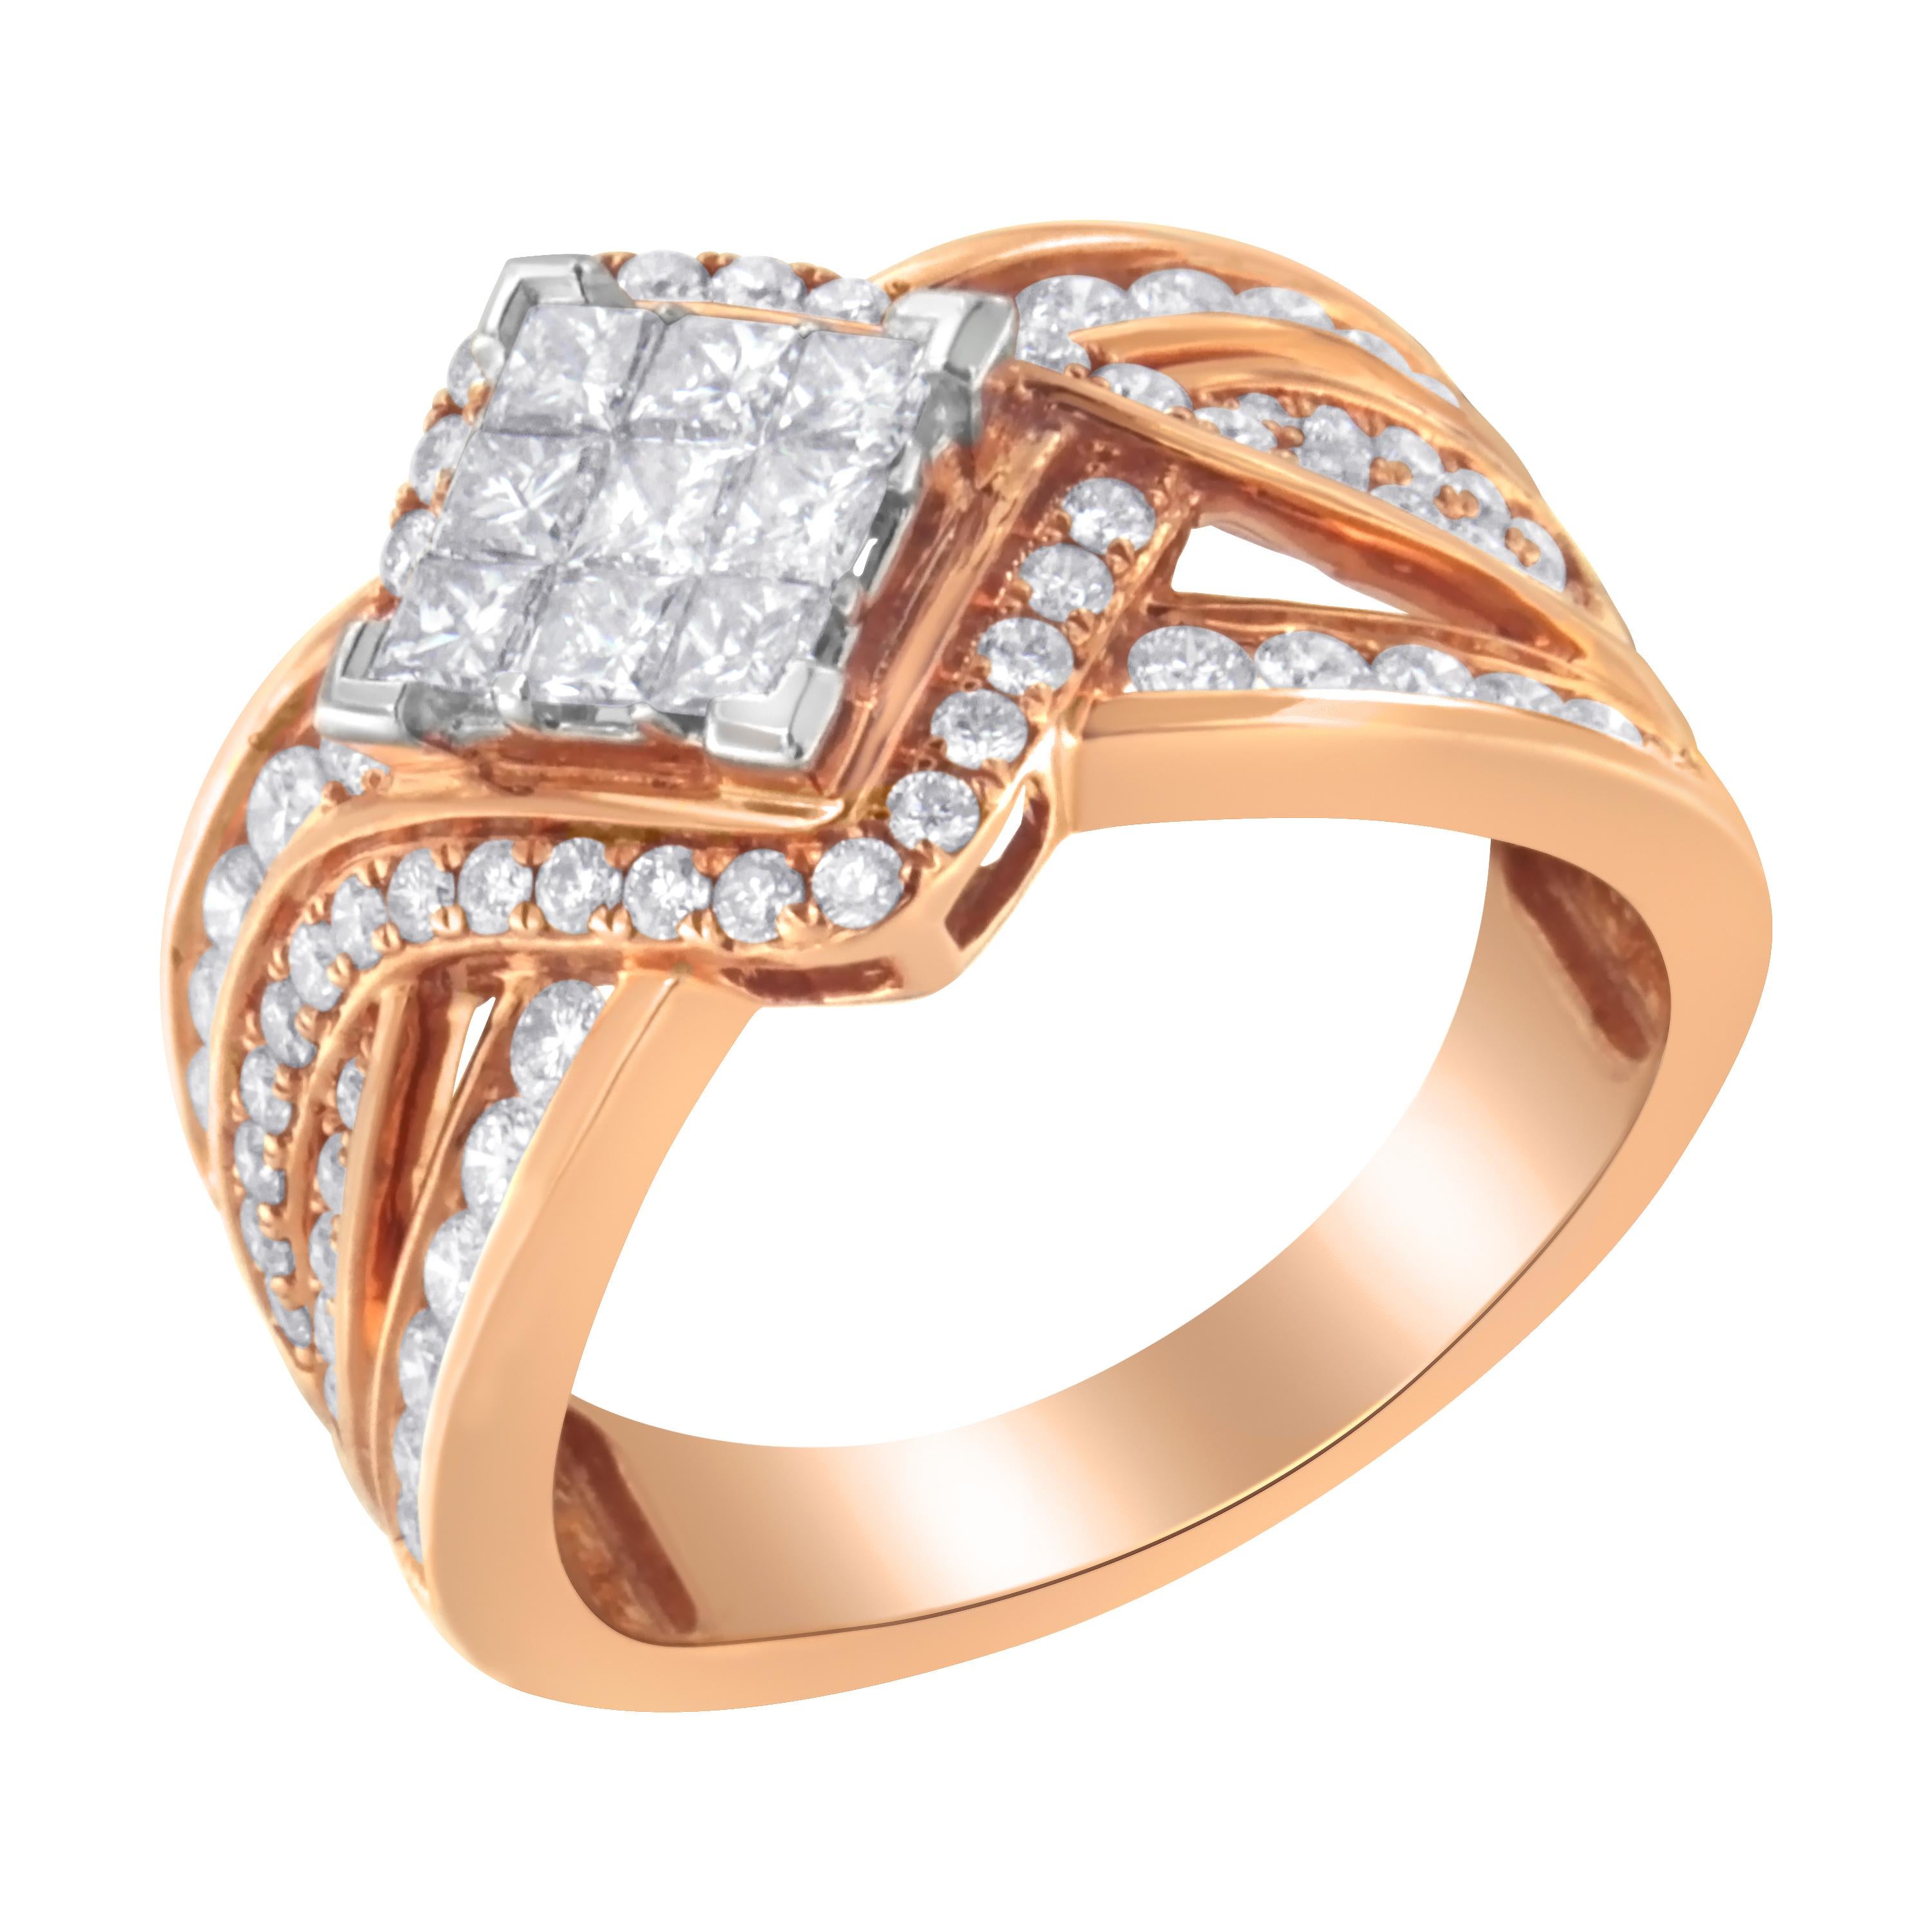 Contemporary Two-Tone 10K Gold 1 1/2 Carat Diamond Bypass Cocktail Ring For Sale